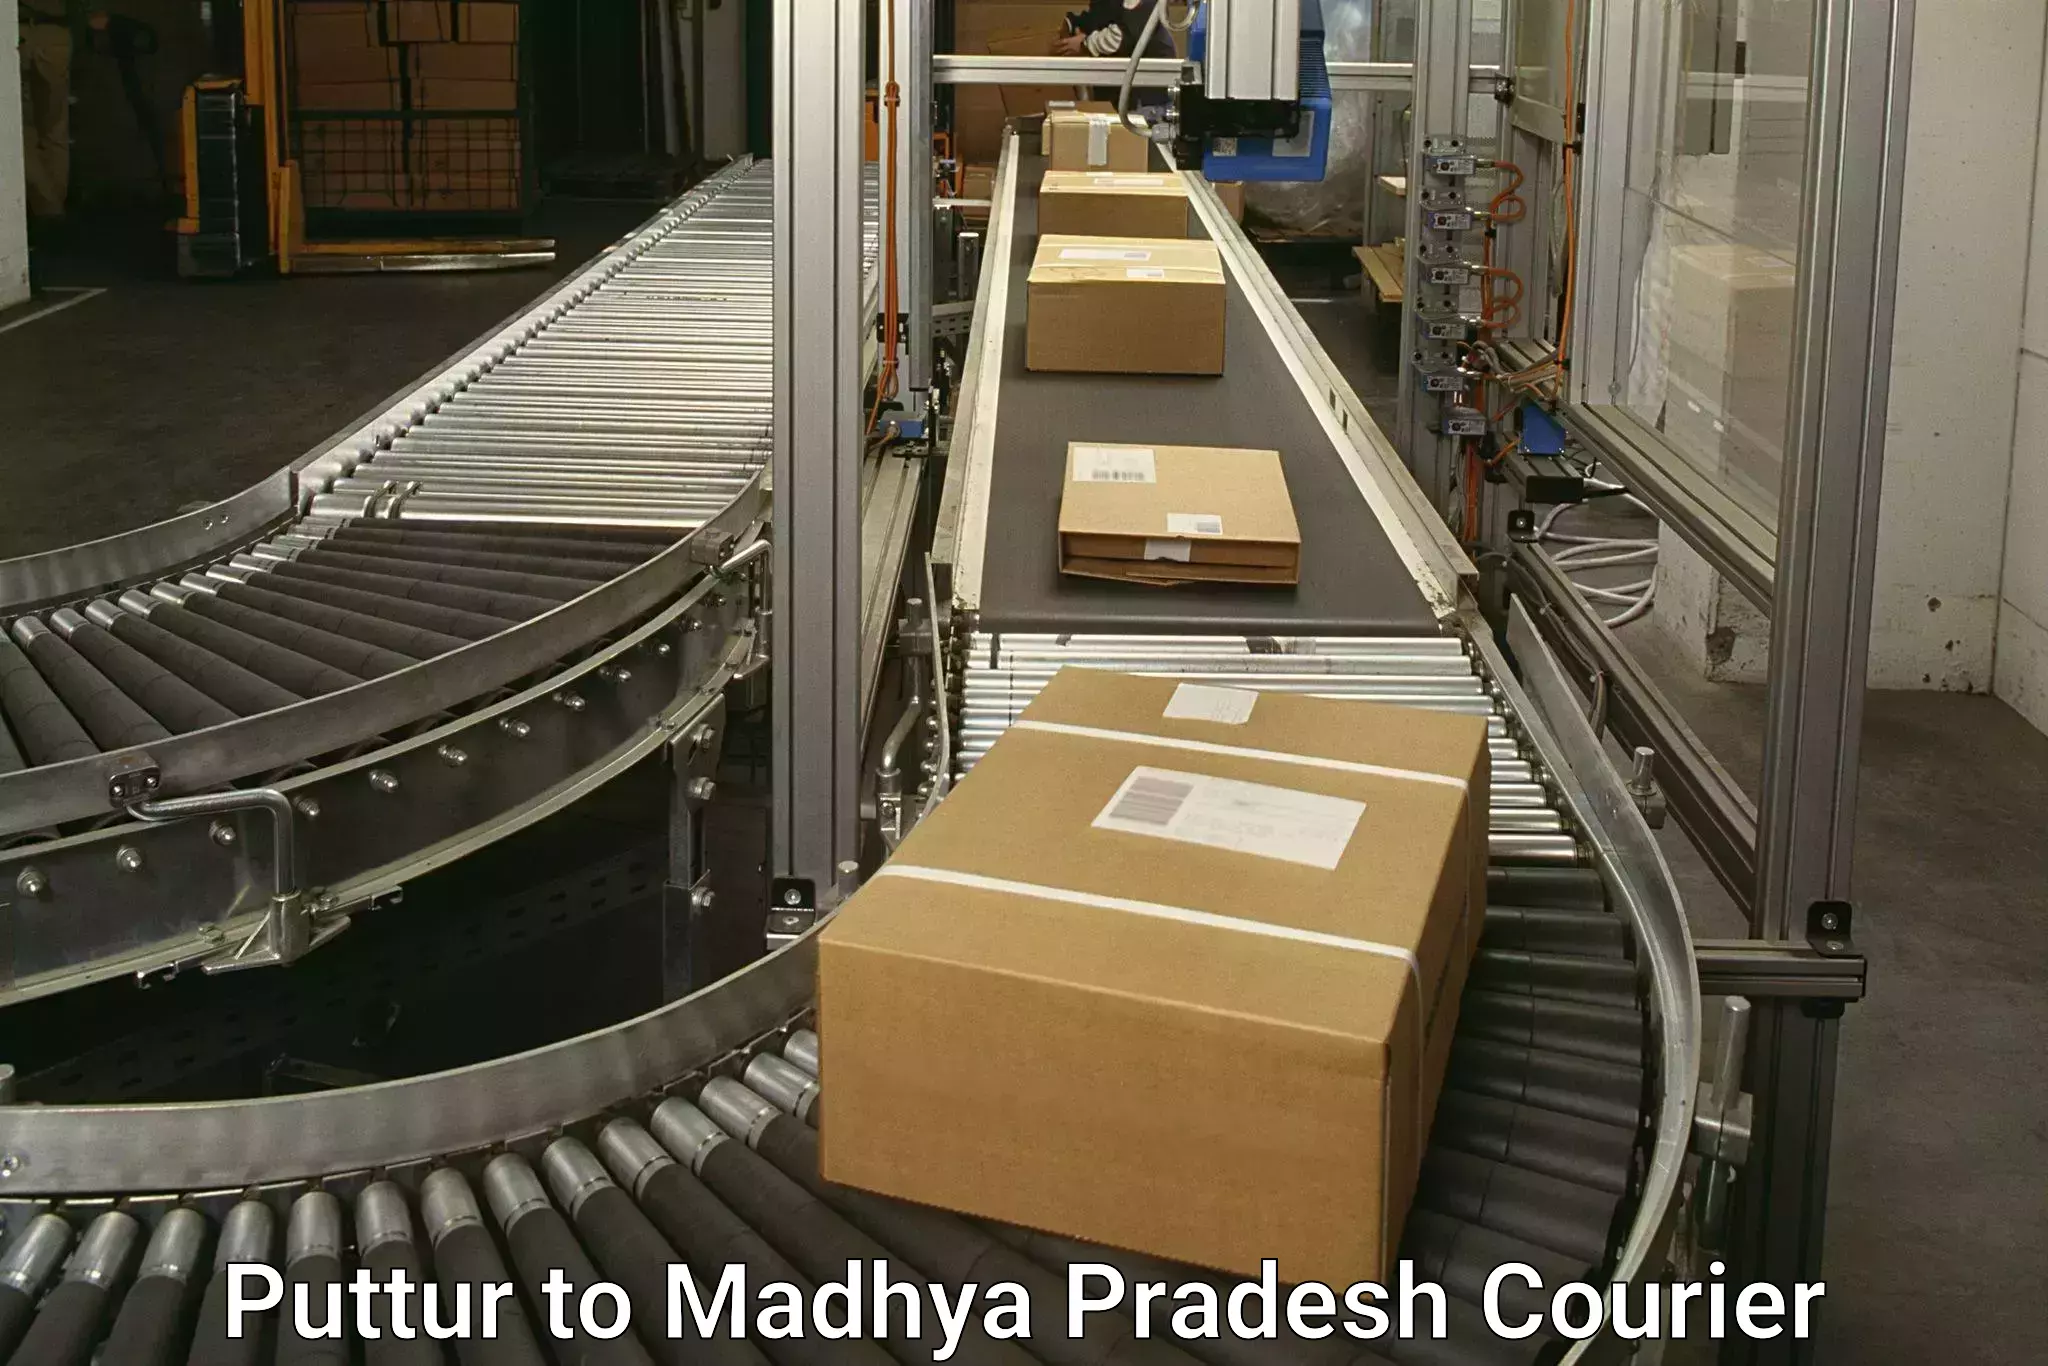 User-friendly courier app Puttur to Sidhi